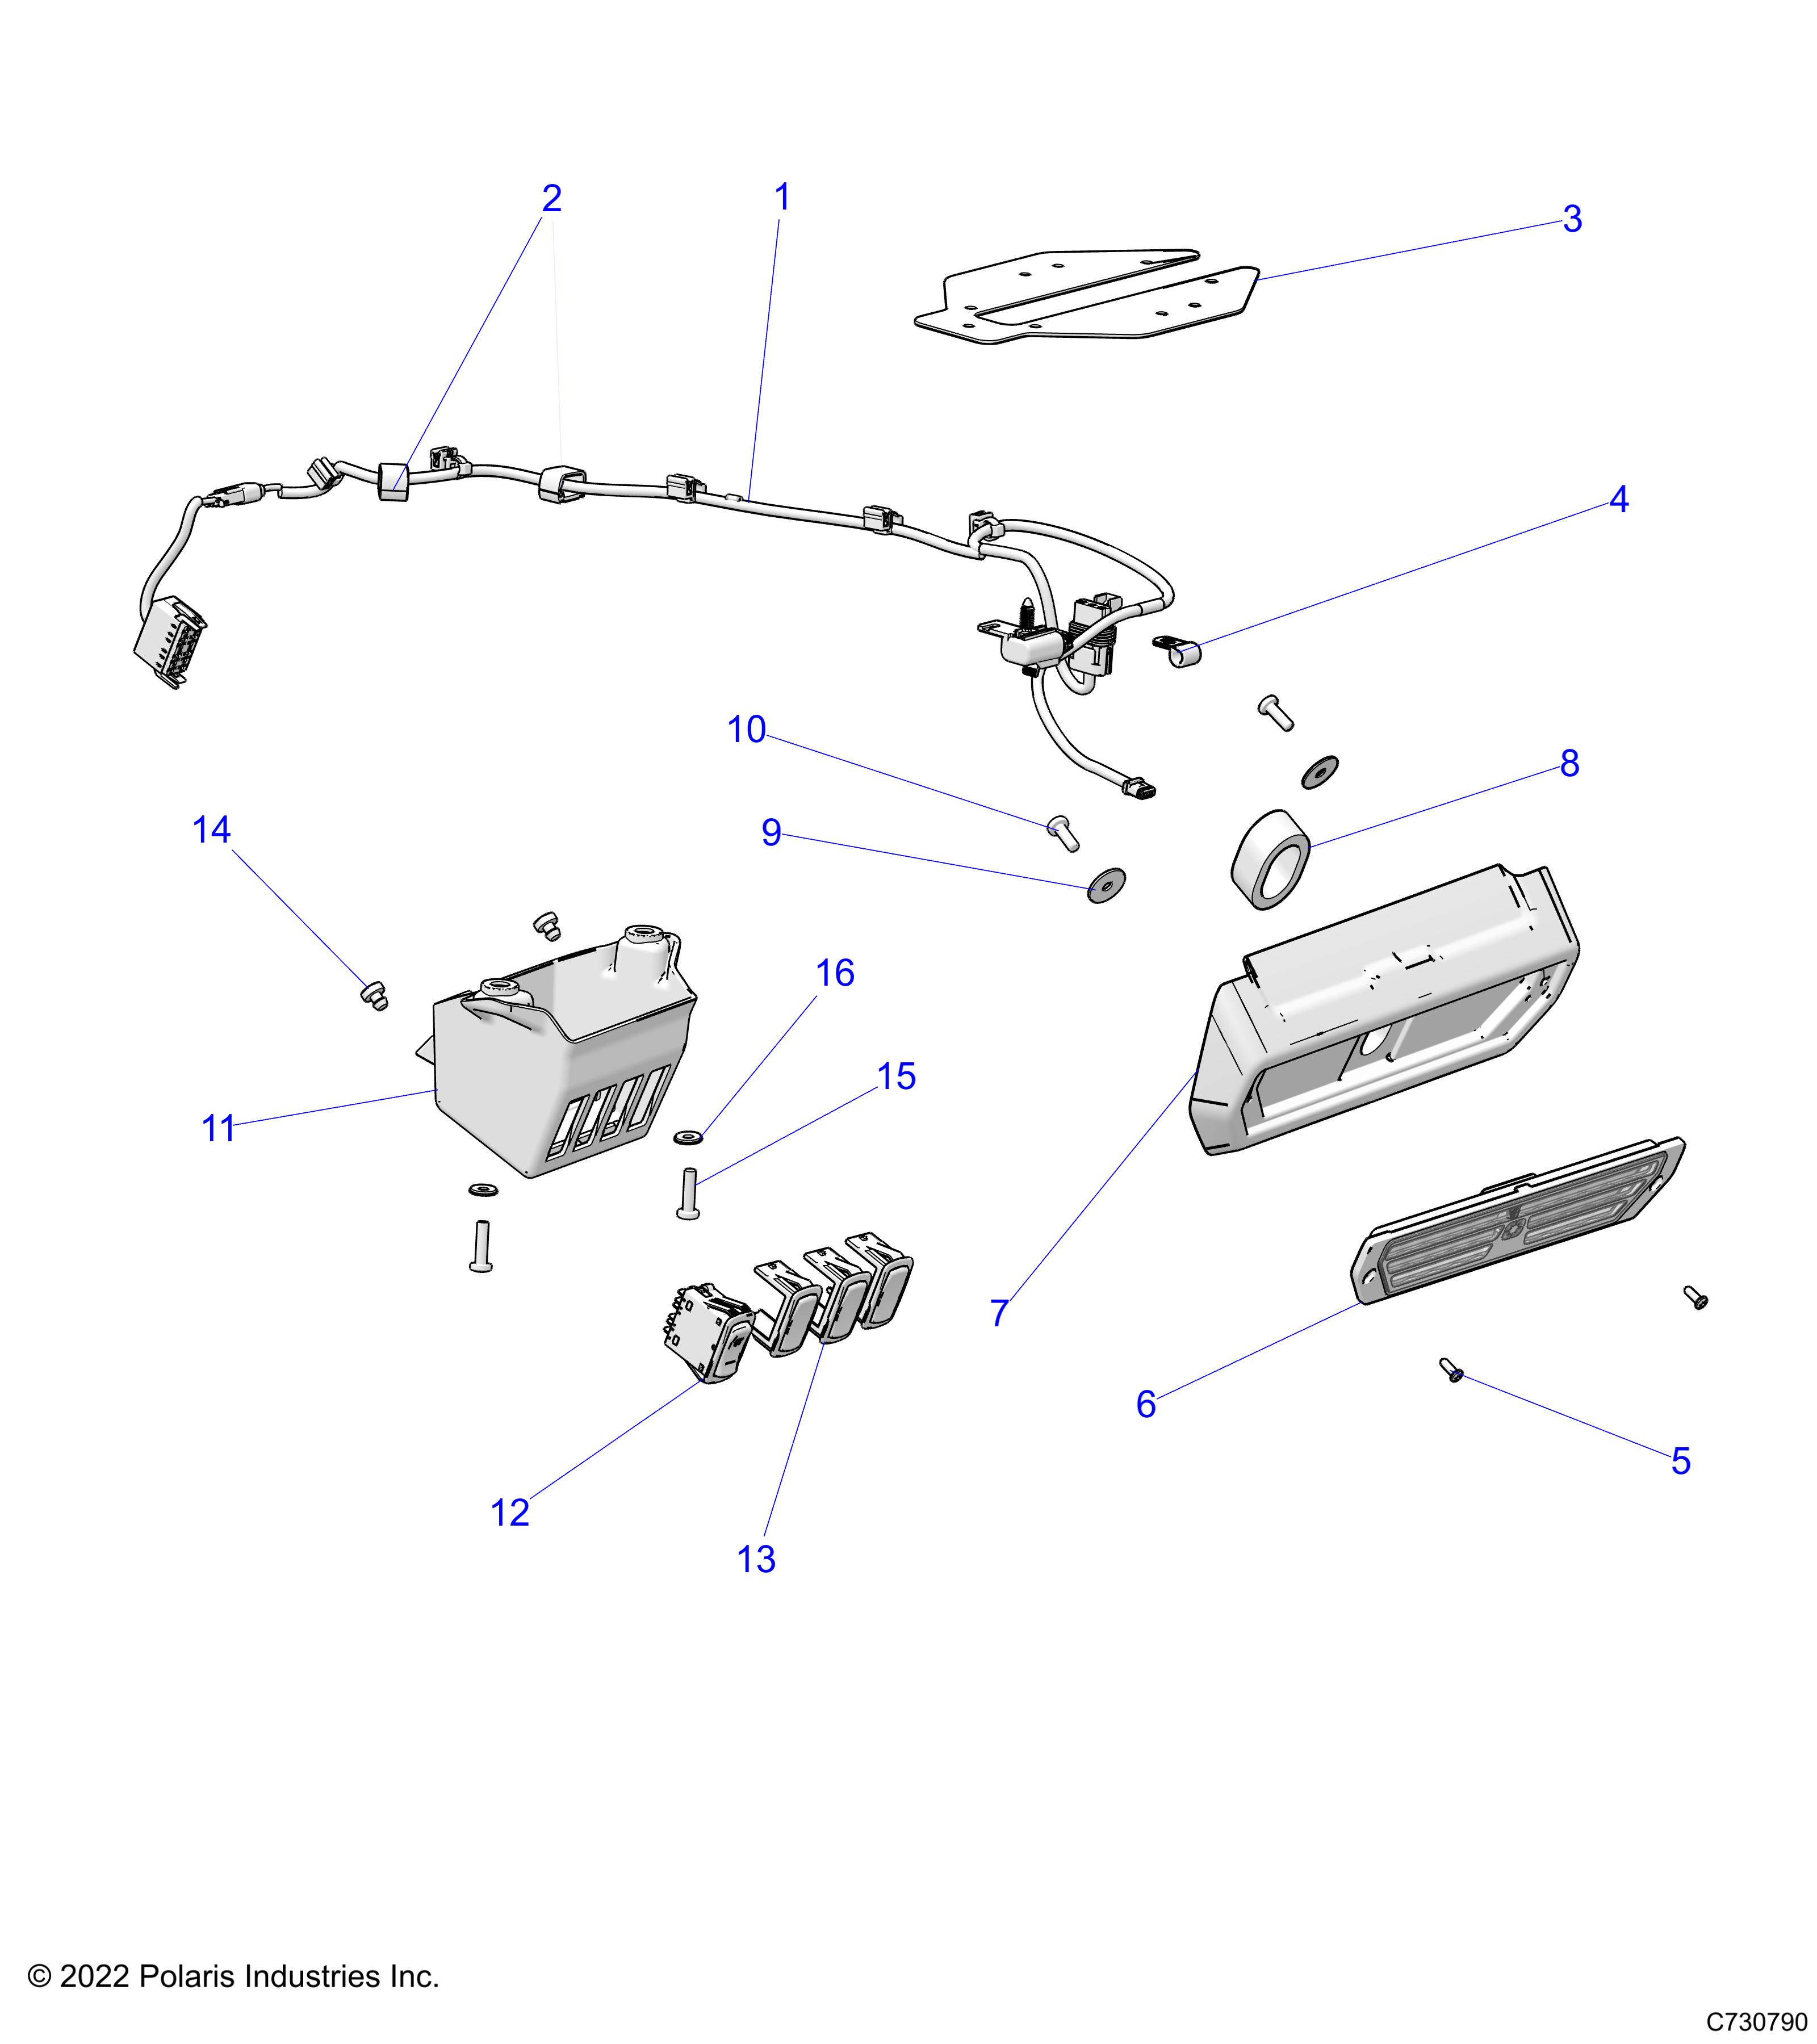 Part Number : 5415017 HARNESS GUIDE